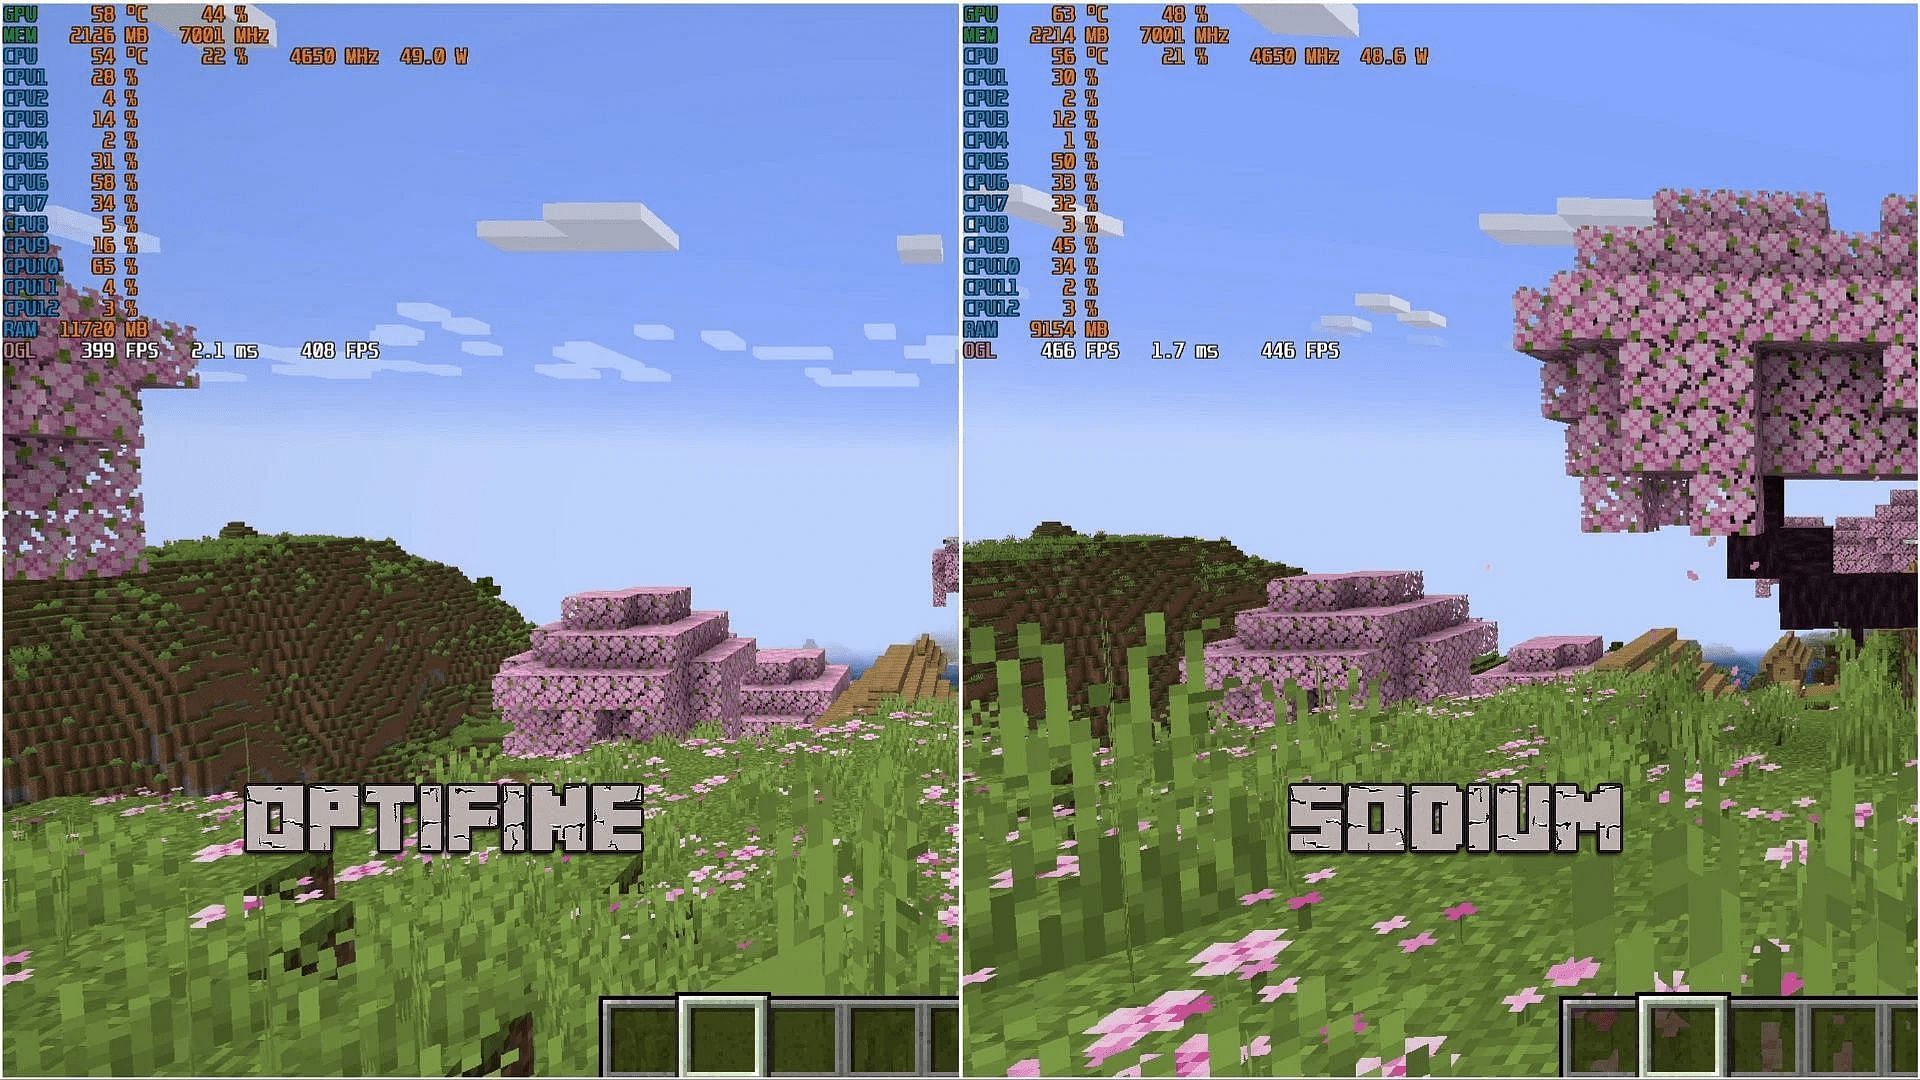 Sodium can often present even higher performance boosts than Optifine (Image via Mojang)